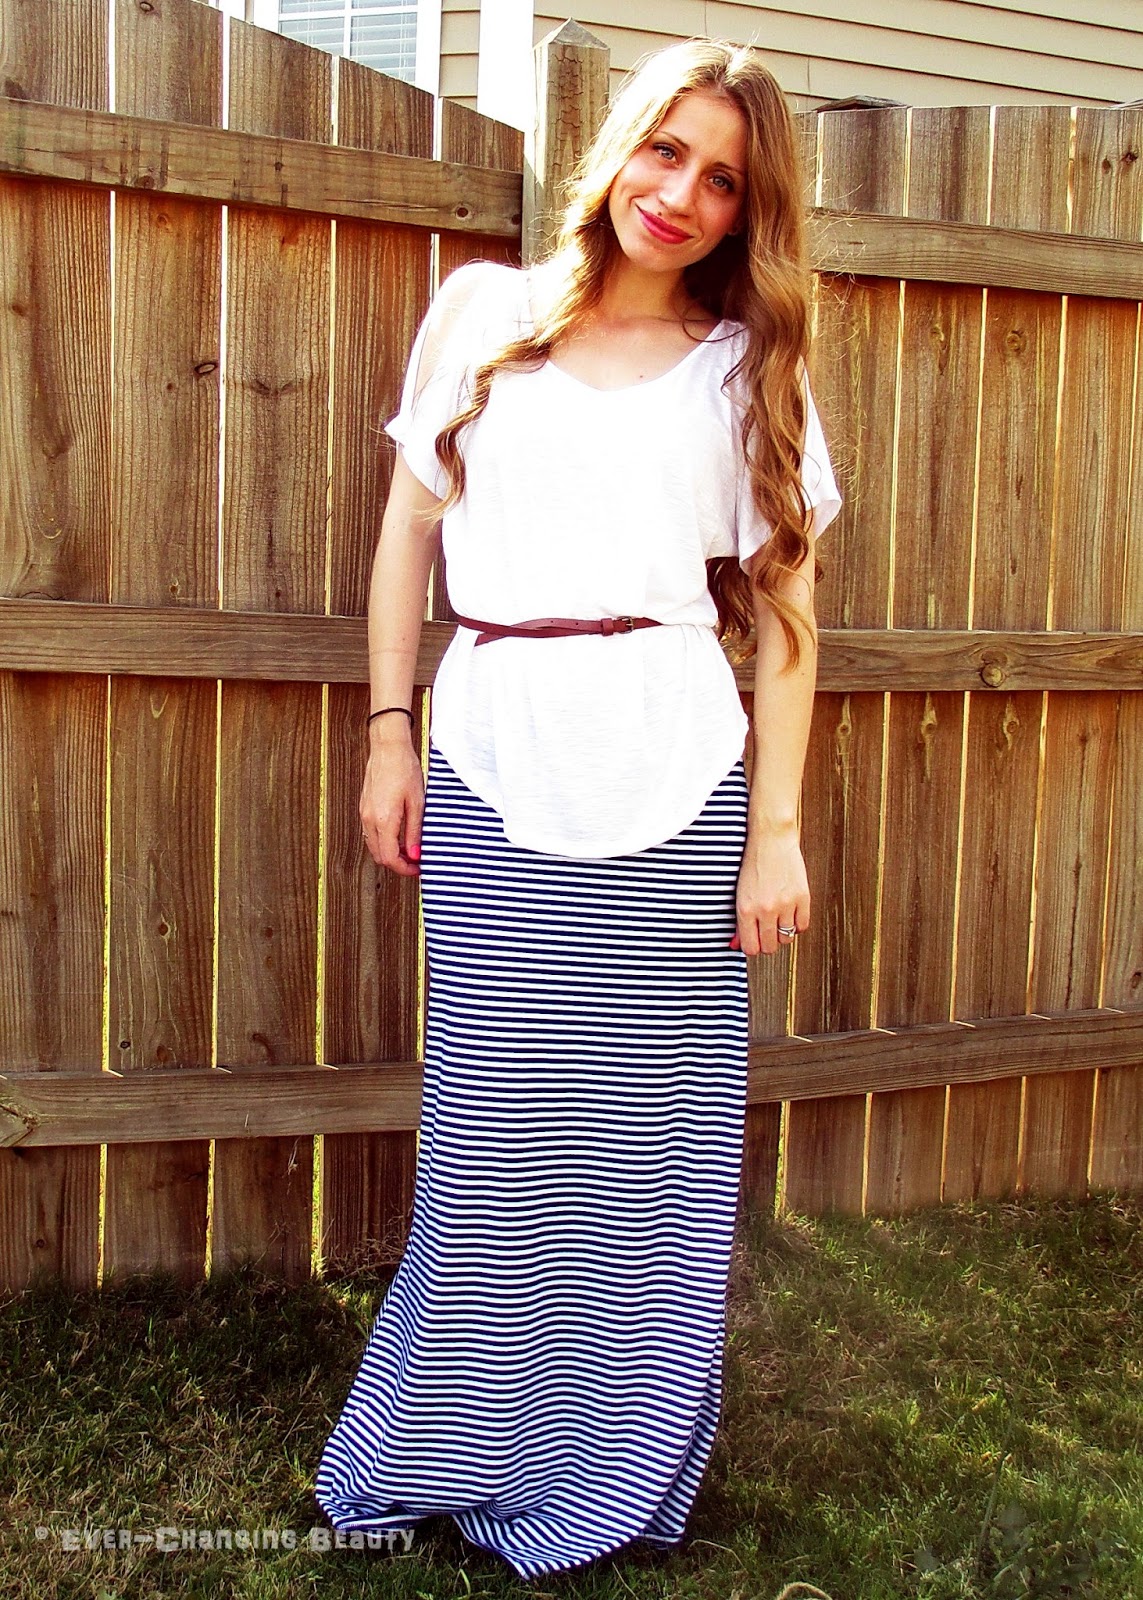 Ever-Changing Beauty.: OOTD Hot Day Maxi Style